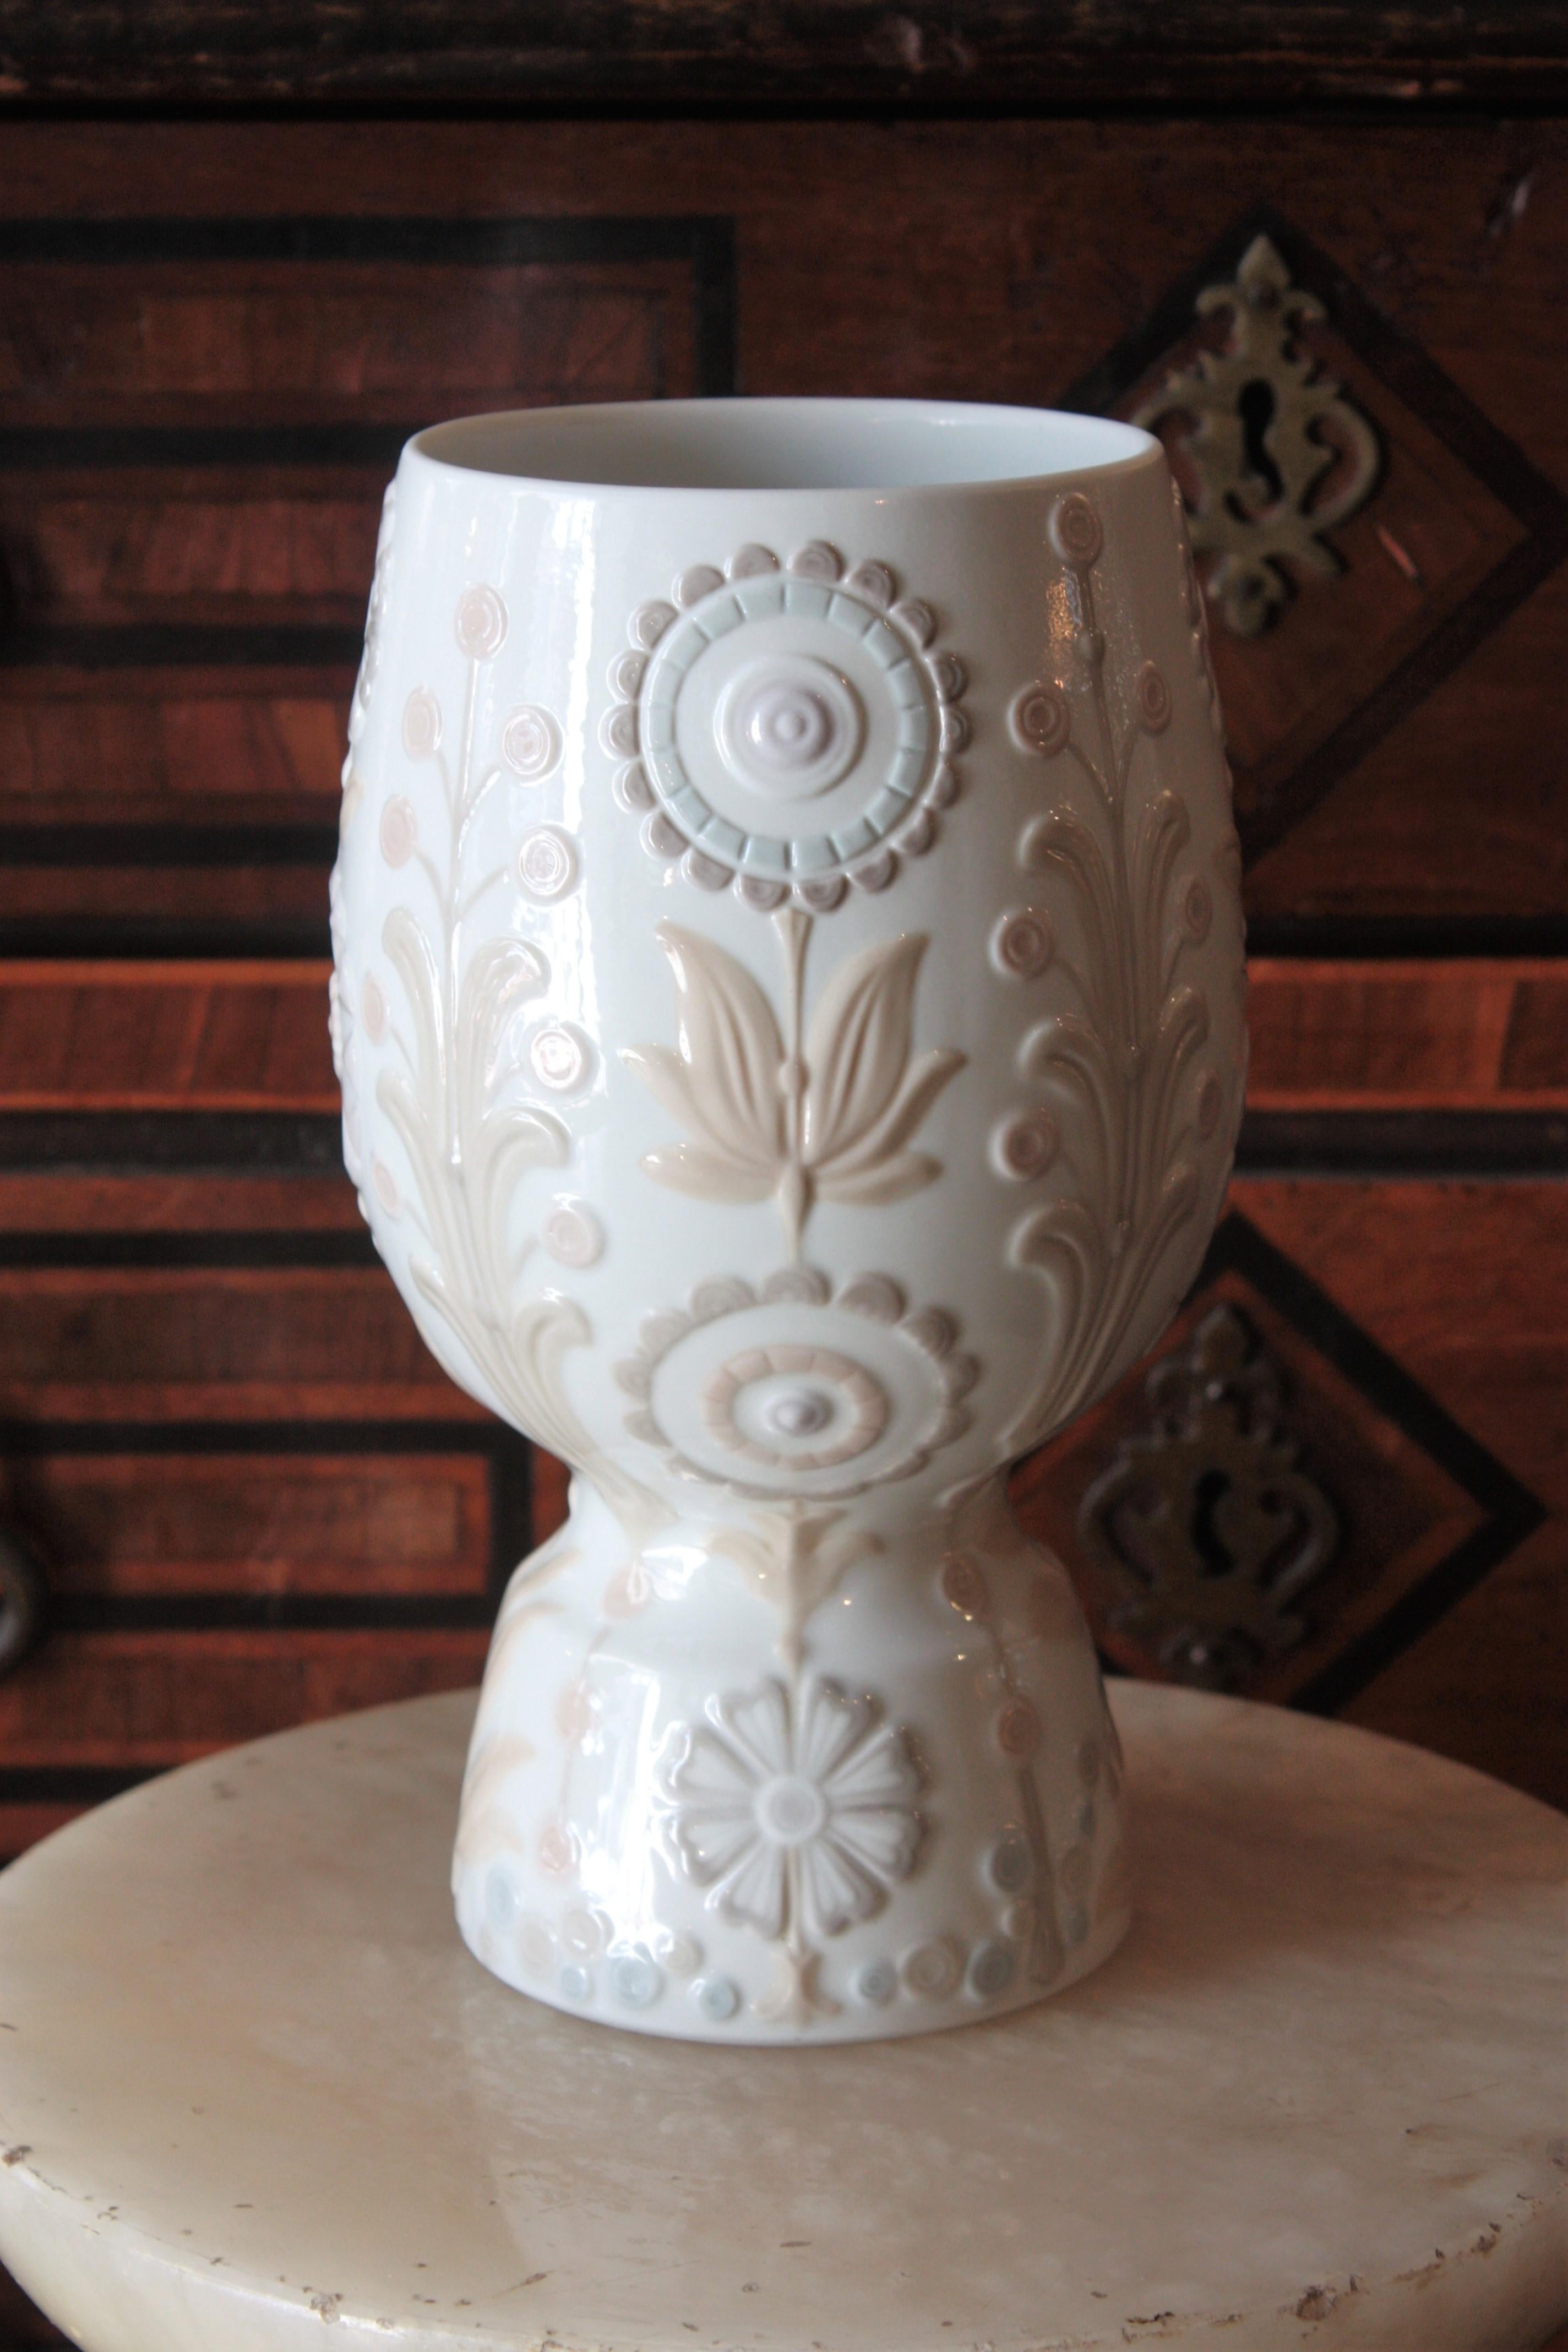 A beautiful porcelain floral vase designed by Julio Fernández and manufactured by Lladró. Spain, 1970s.
This elegant glazed porcelain vase has a clean design with floral and foliage decorations in pastel colors.
Mint condition.
It has the mark of